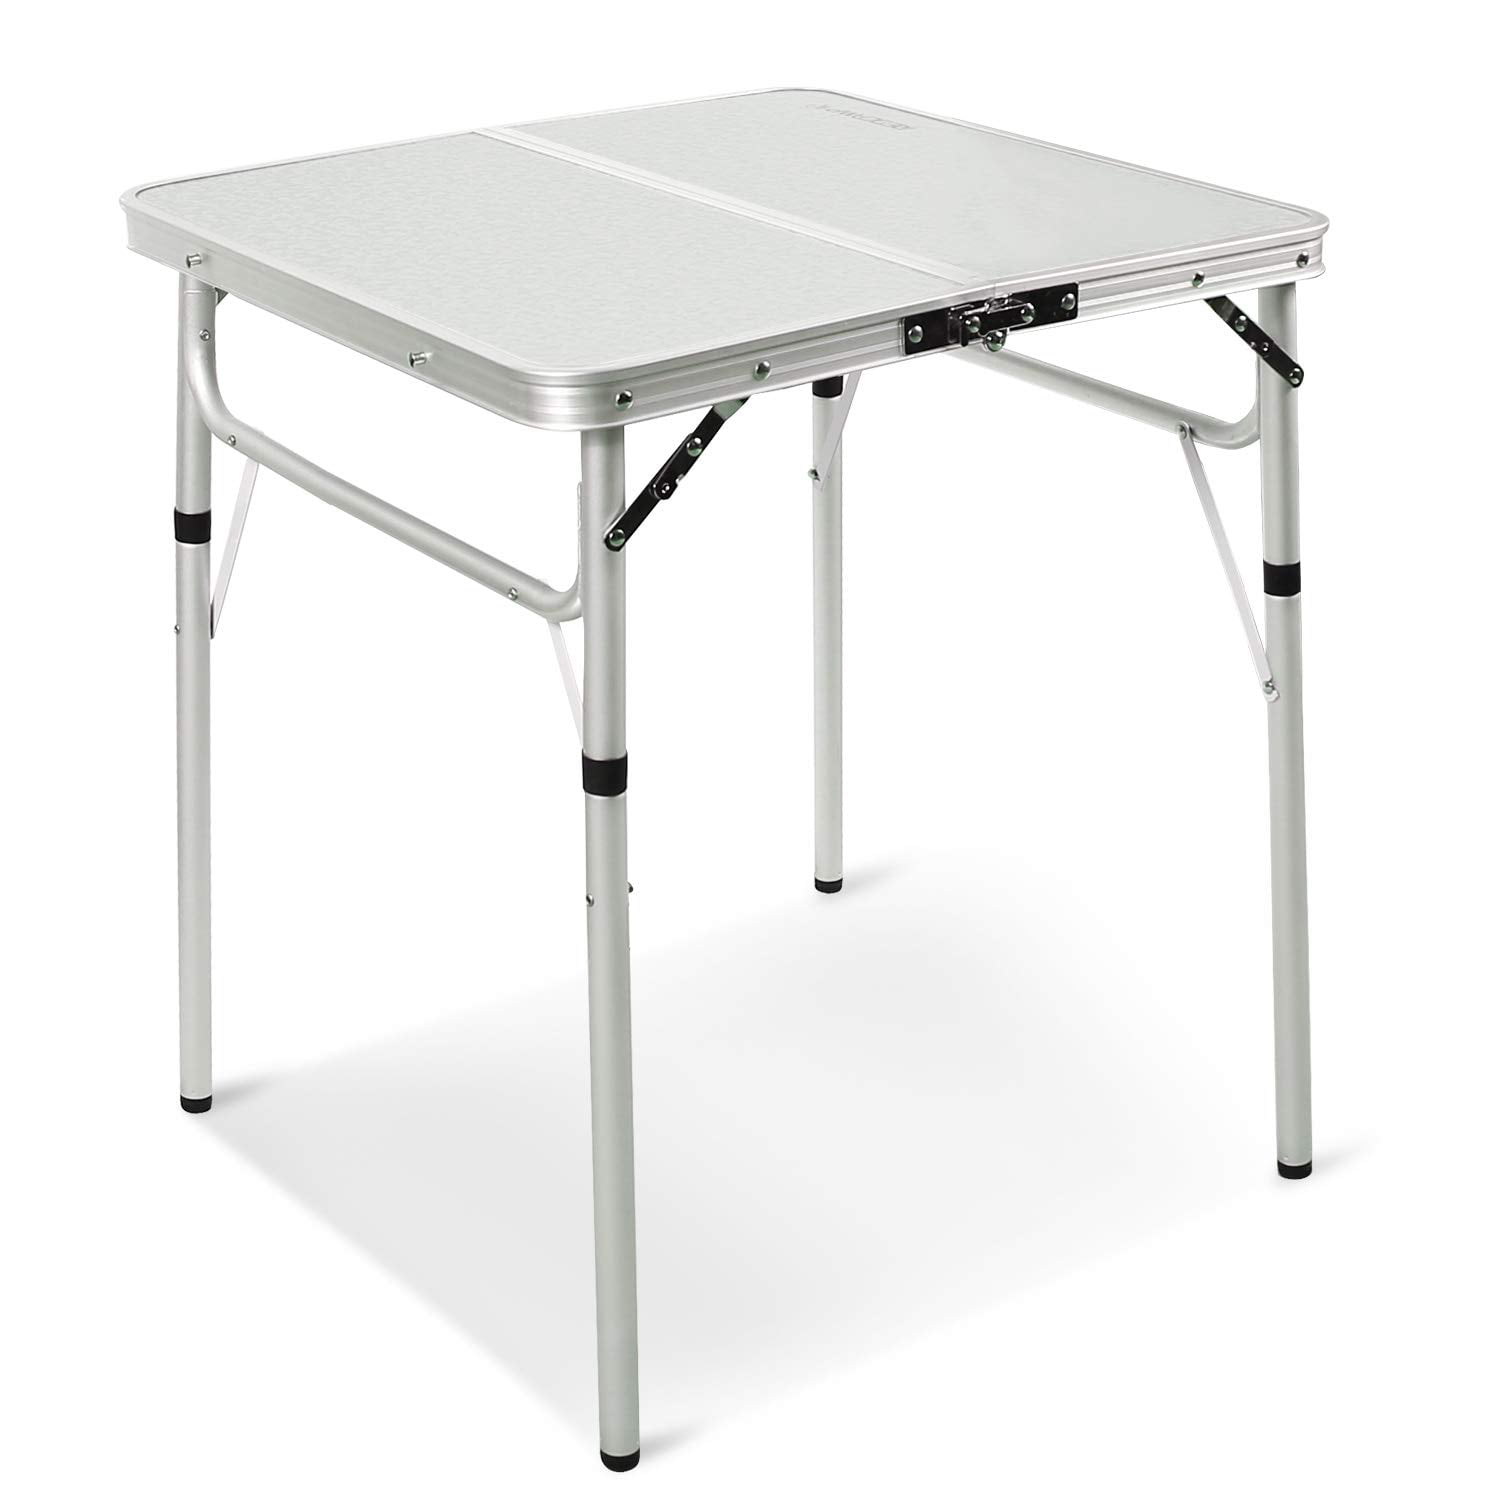 Nice C Folding Table Adjustable Height, Portable Camping Table 